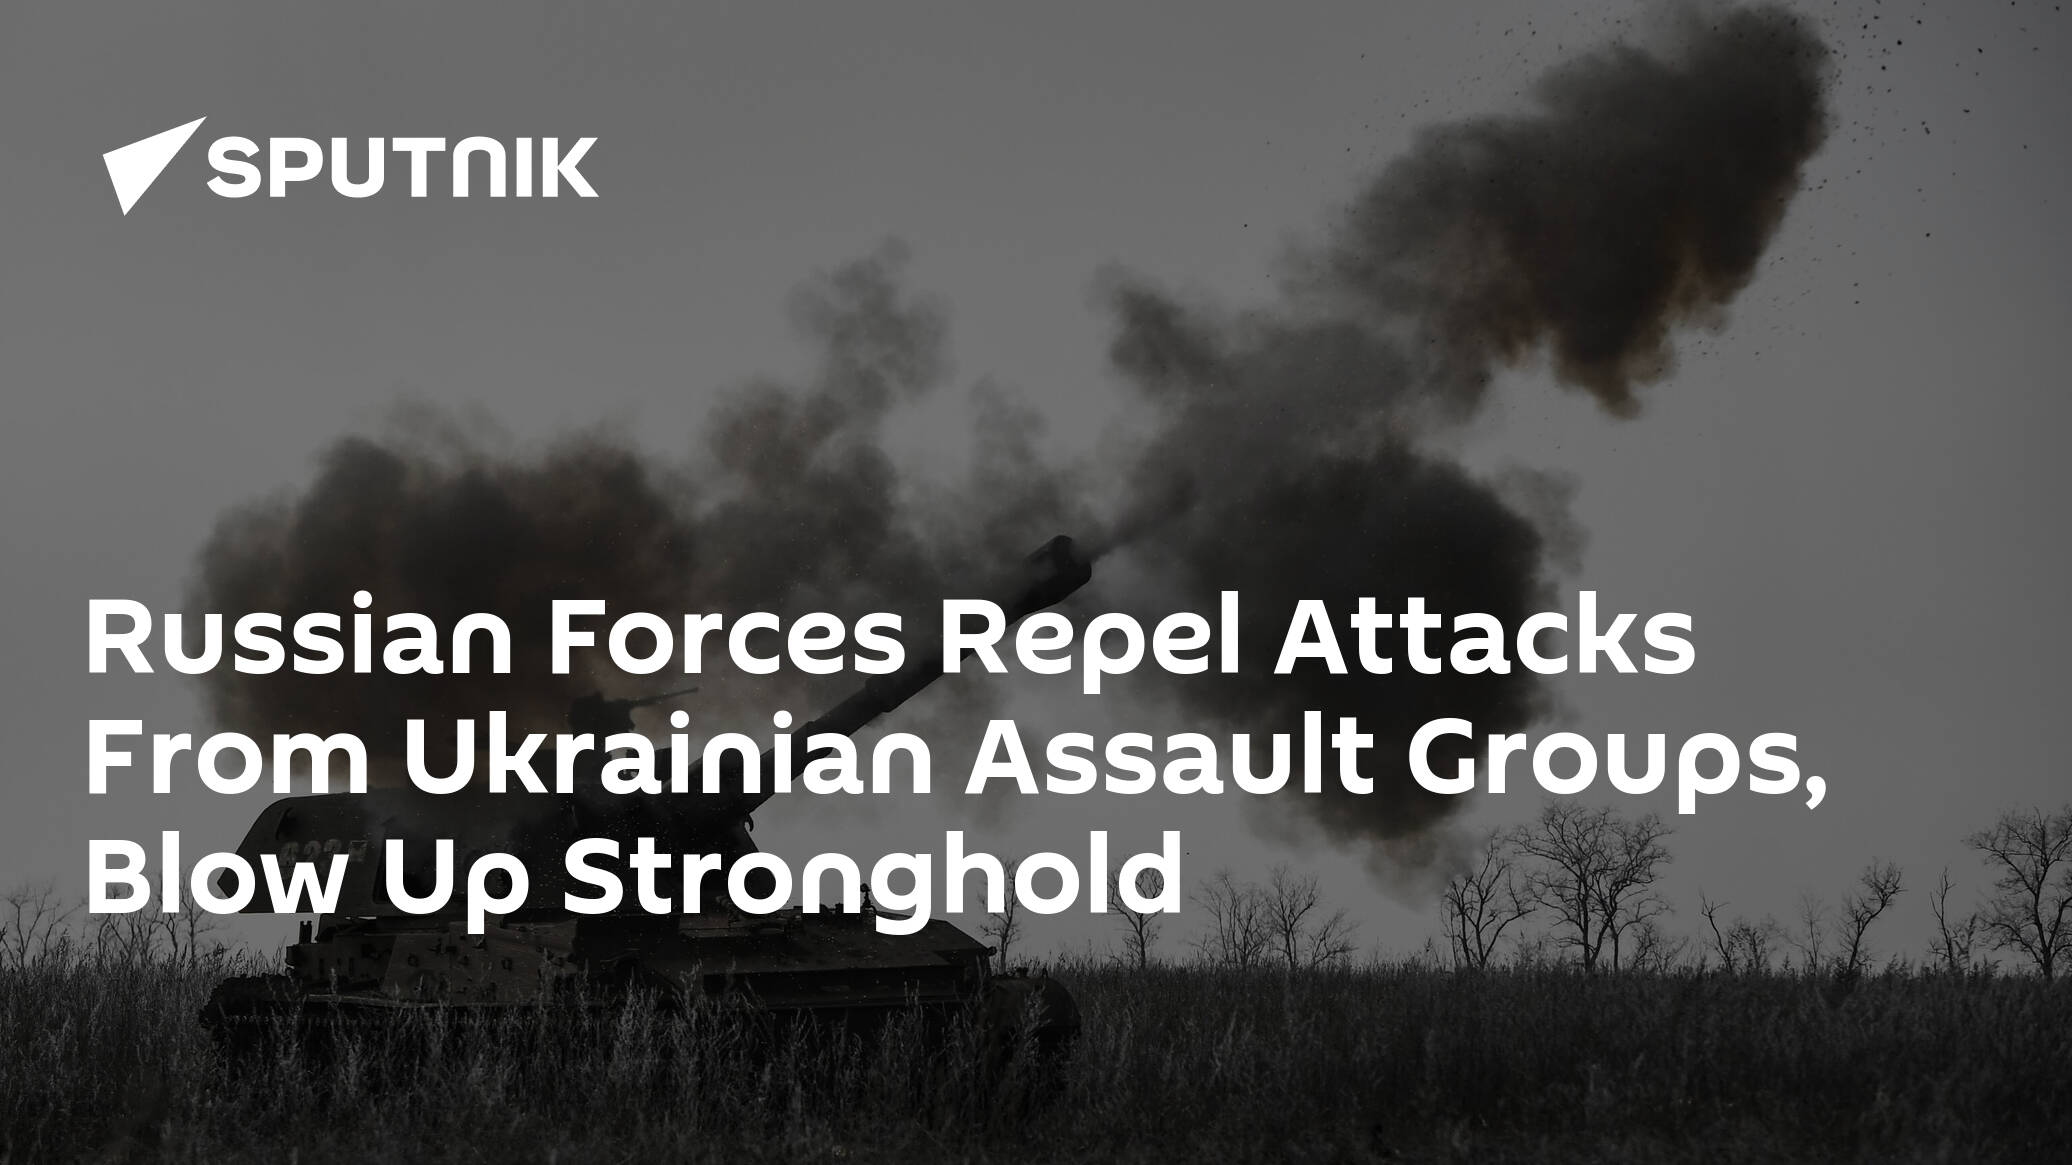 Russian Forces Repel Attacks From Ukrainian Assault Groups, Blow Up Stronghold